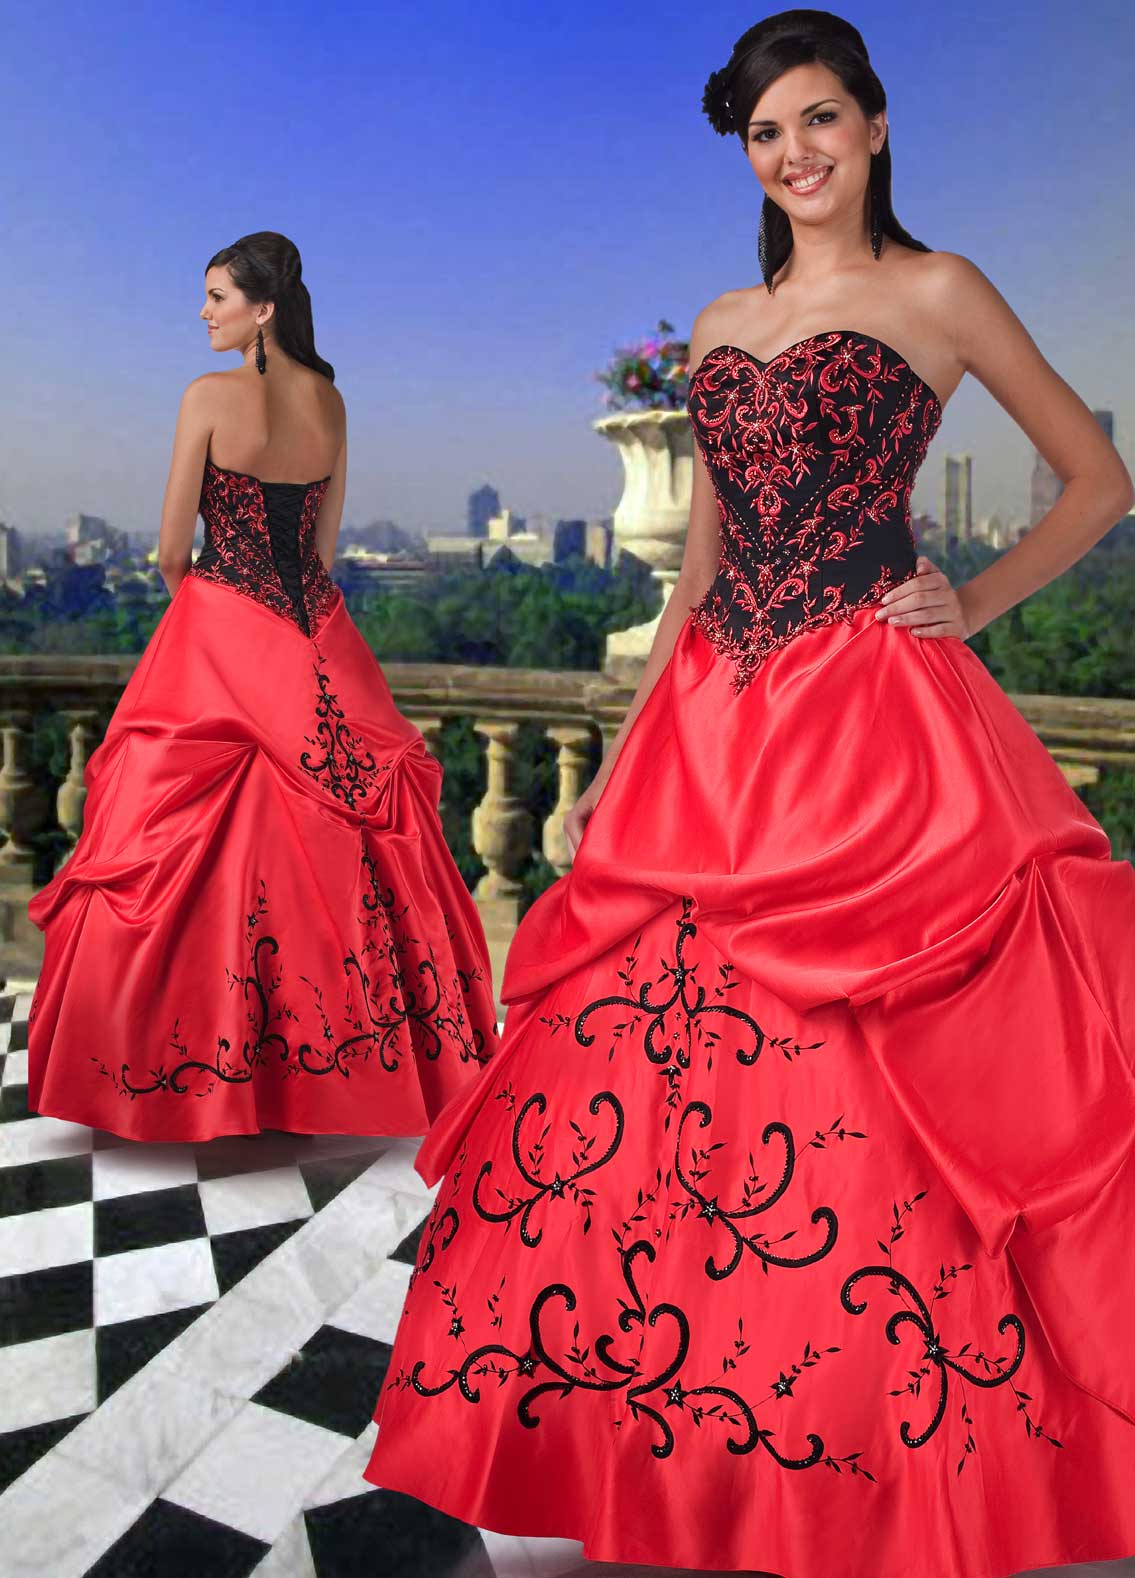 Red And Black Ball Gown Strapless Sweetheart Full Length Quinceanera Dresses With Embroidery And Ruffles 